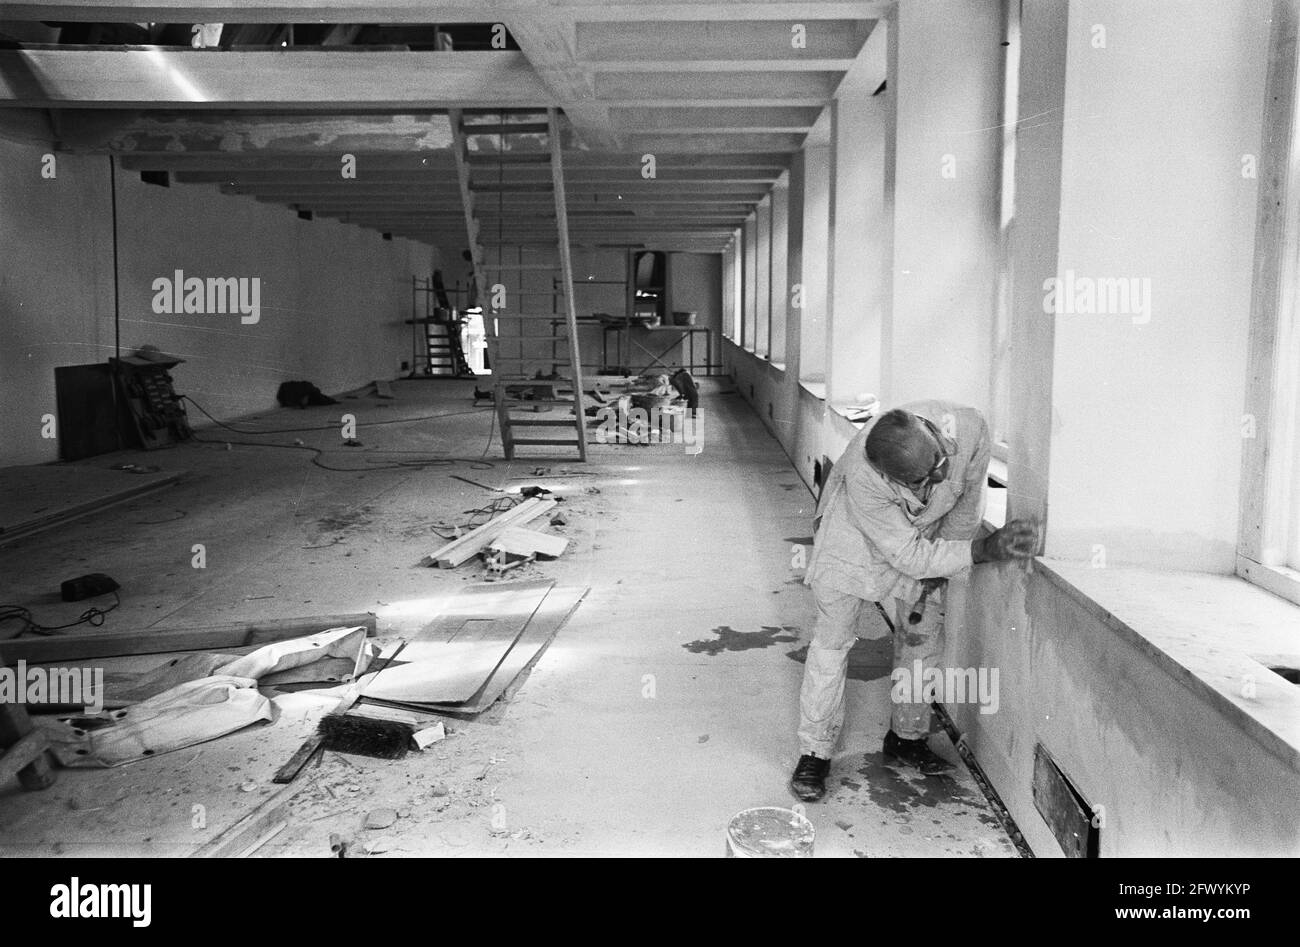 restorations, orphanages, 2 July 1969, restorations, orphanages, The Netherlands, 20th century press agency photo, news to remember, documentary, historic photography 1945-1990, visual stories, human history of the Twentieth Century, capturing moments in time Stock Photo